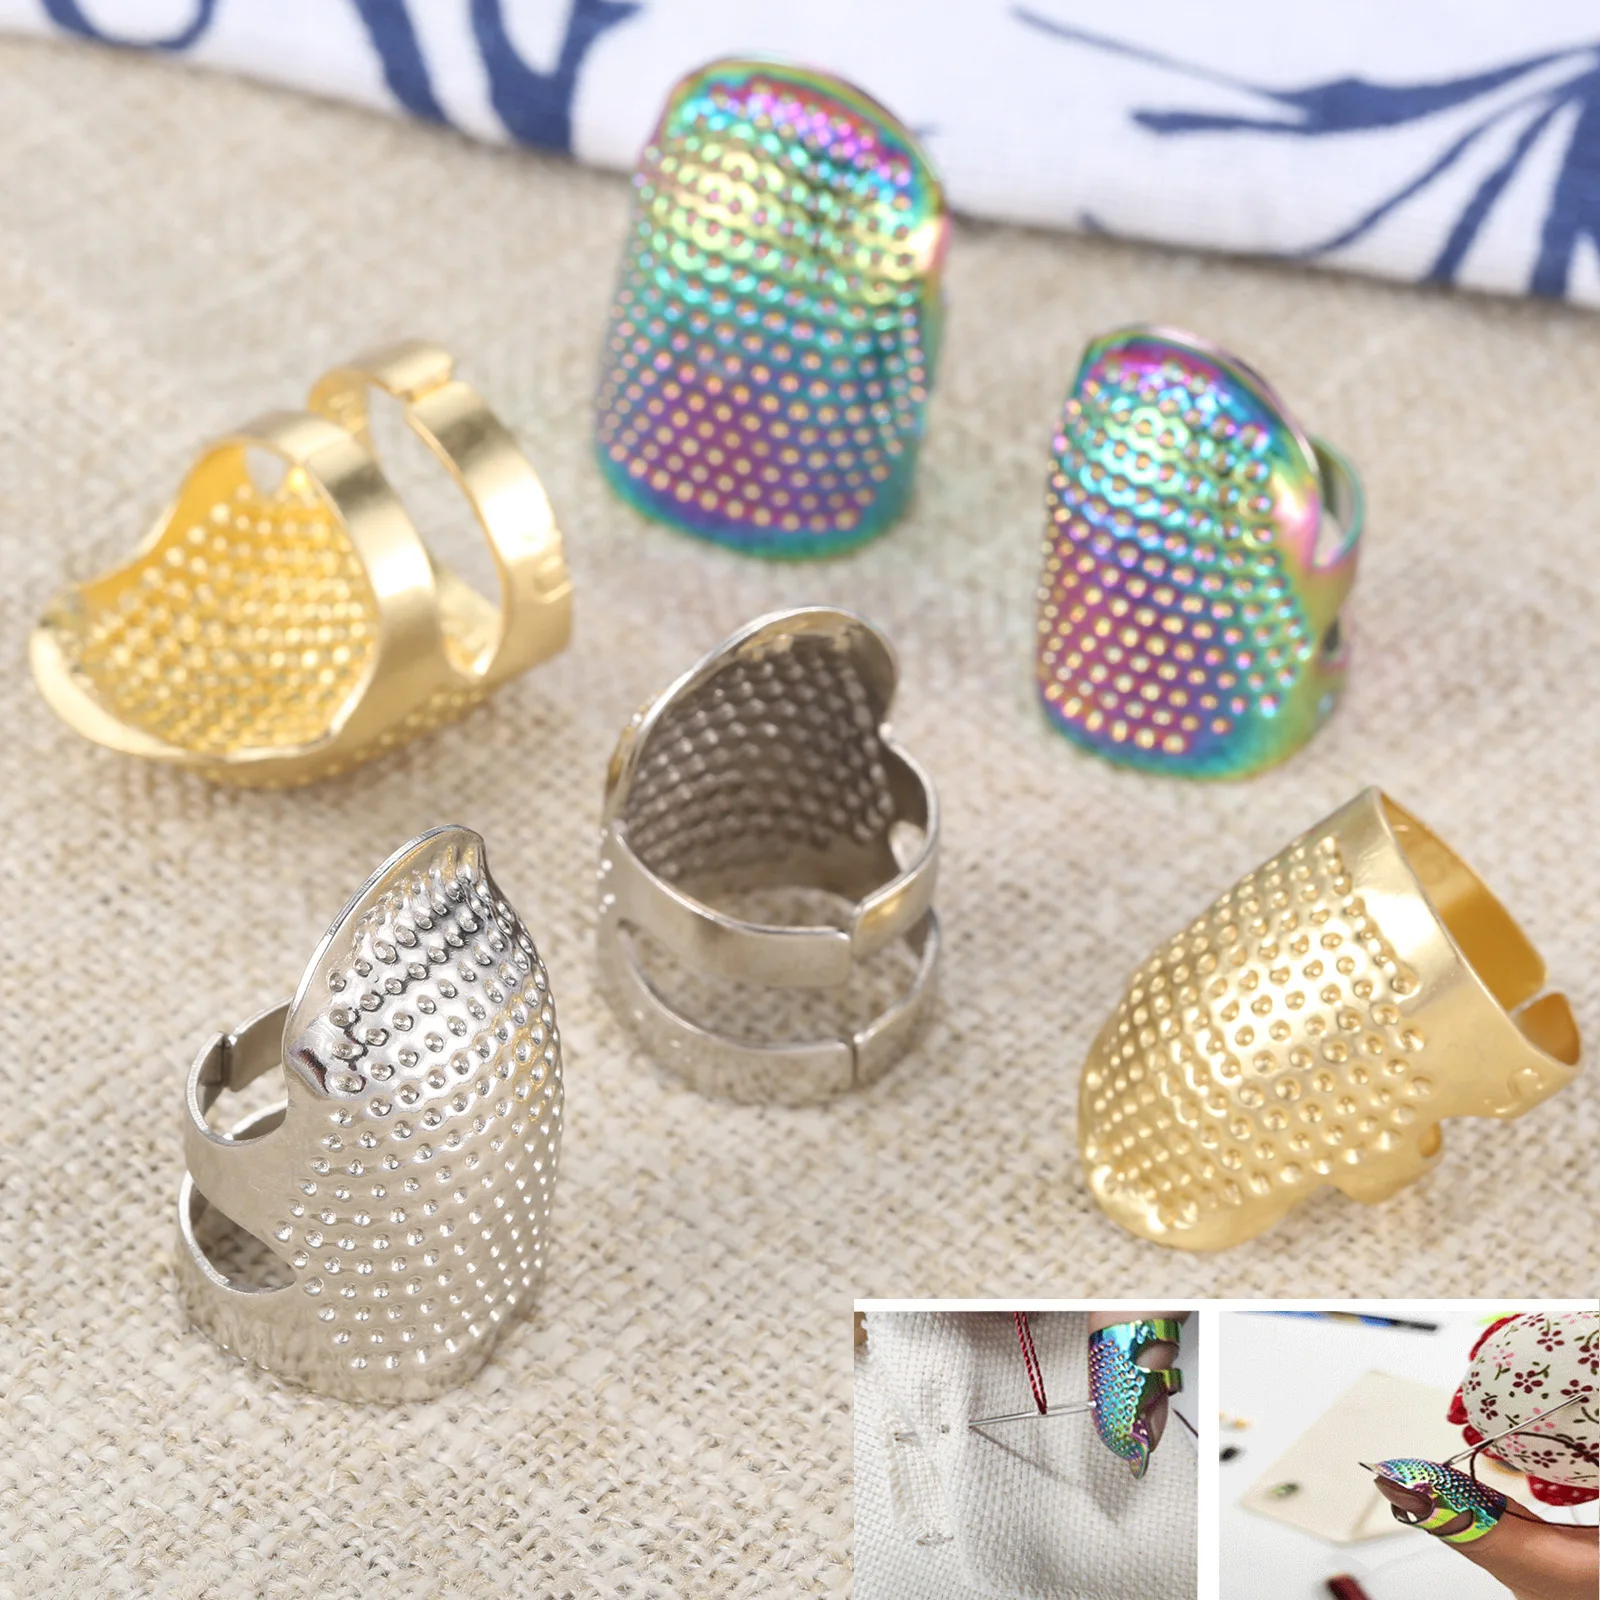 Old Retro Style Metal Finger Guard Thimble Ring Manual Work Needle Thimble Needles Crafts Home Sewing